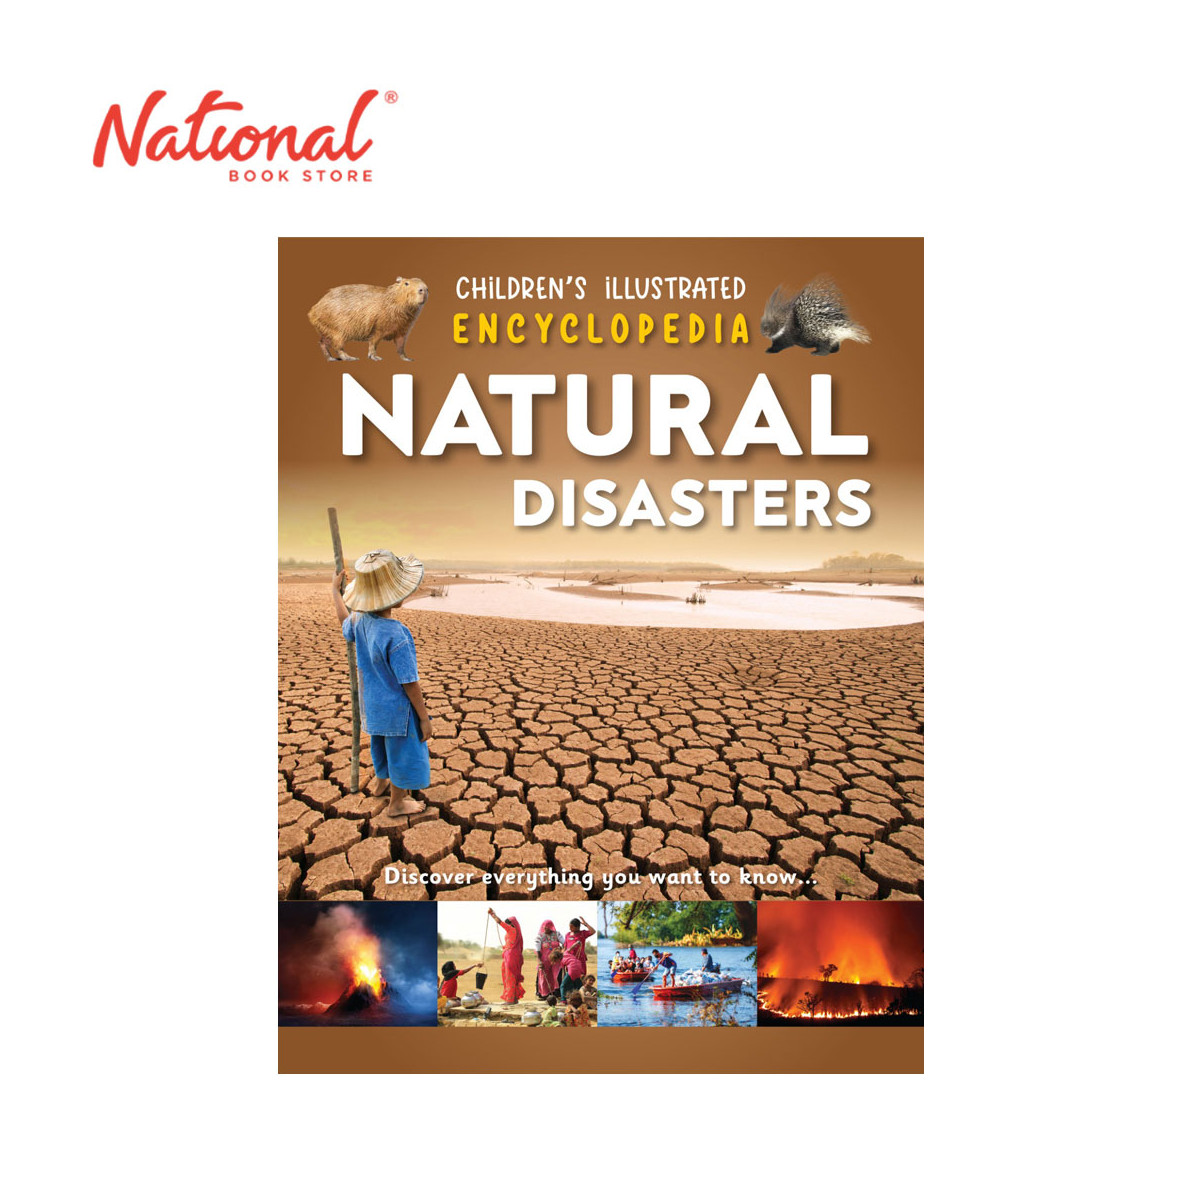 Children's Illustrated Encyclopedia: Natural Disasters - Trade Paperback - Books for Kids